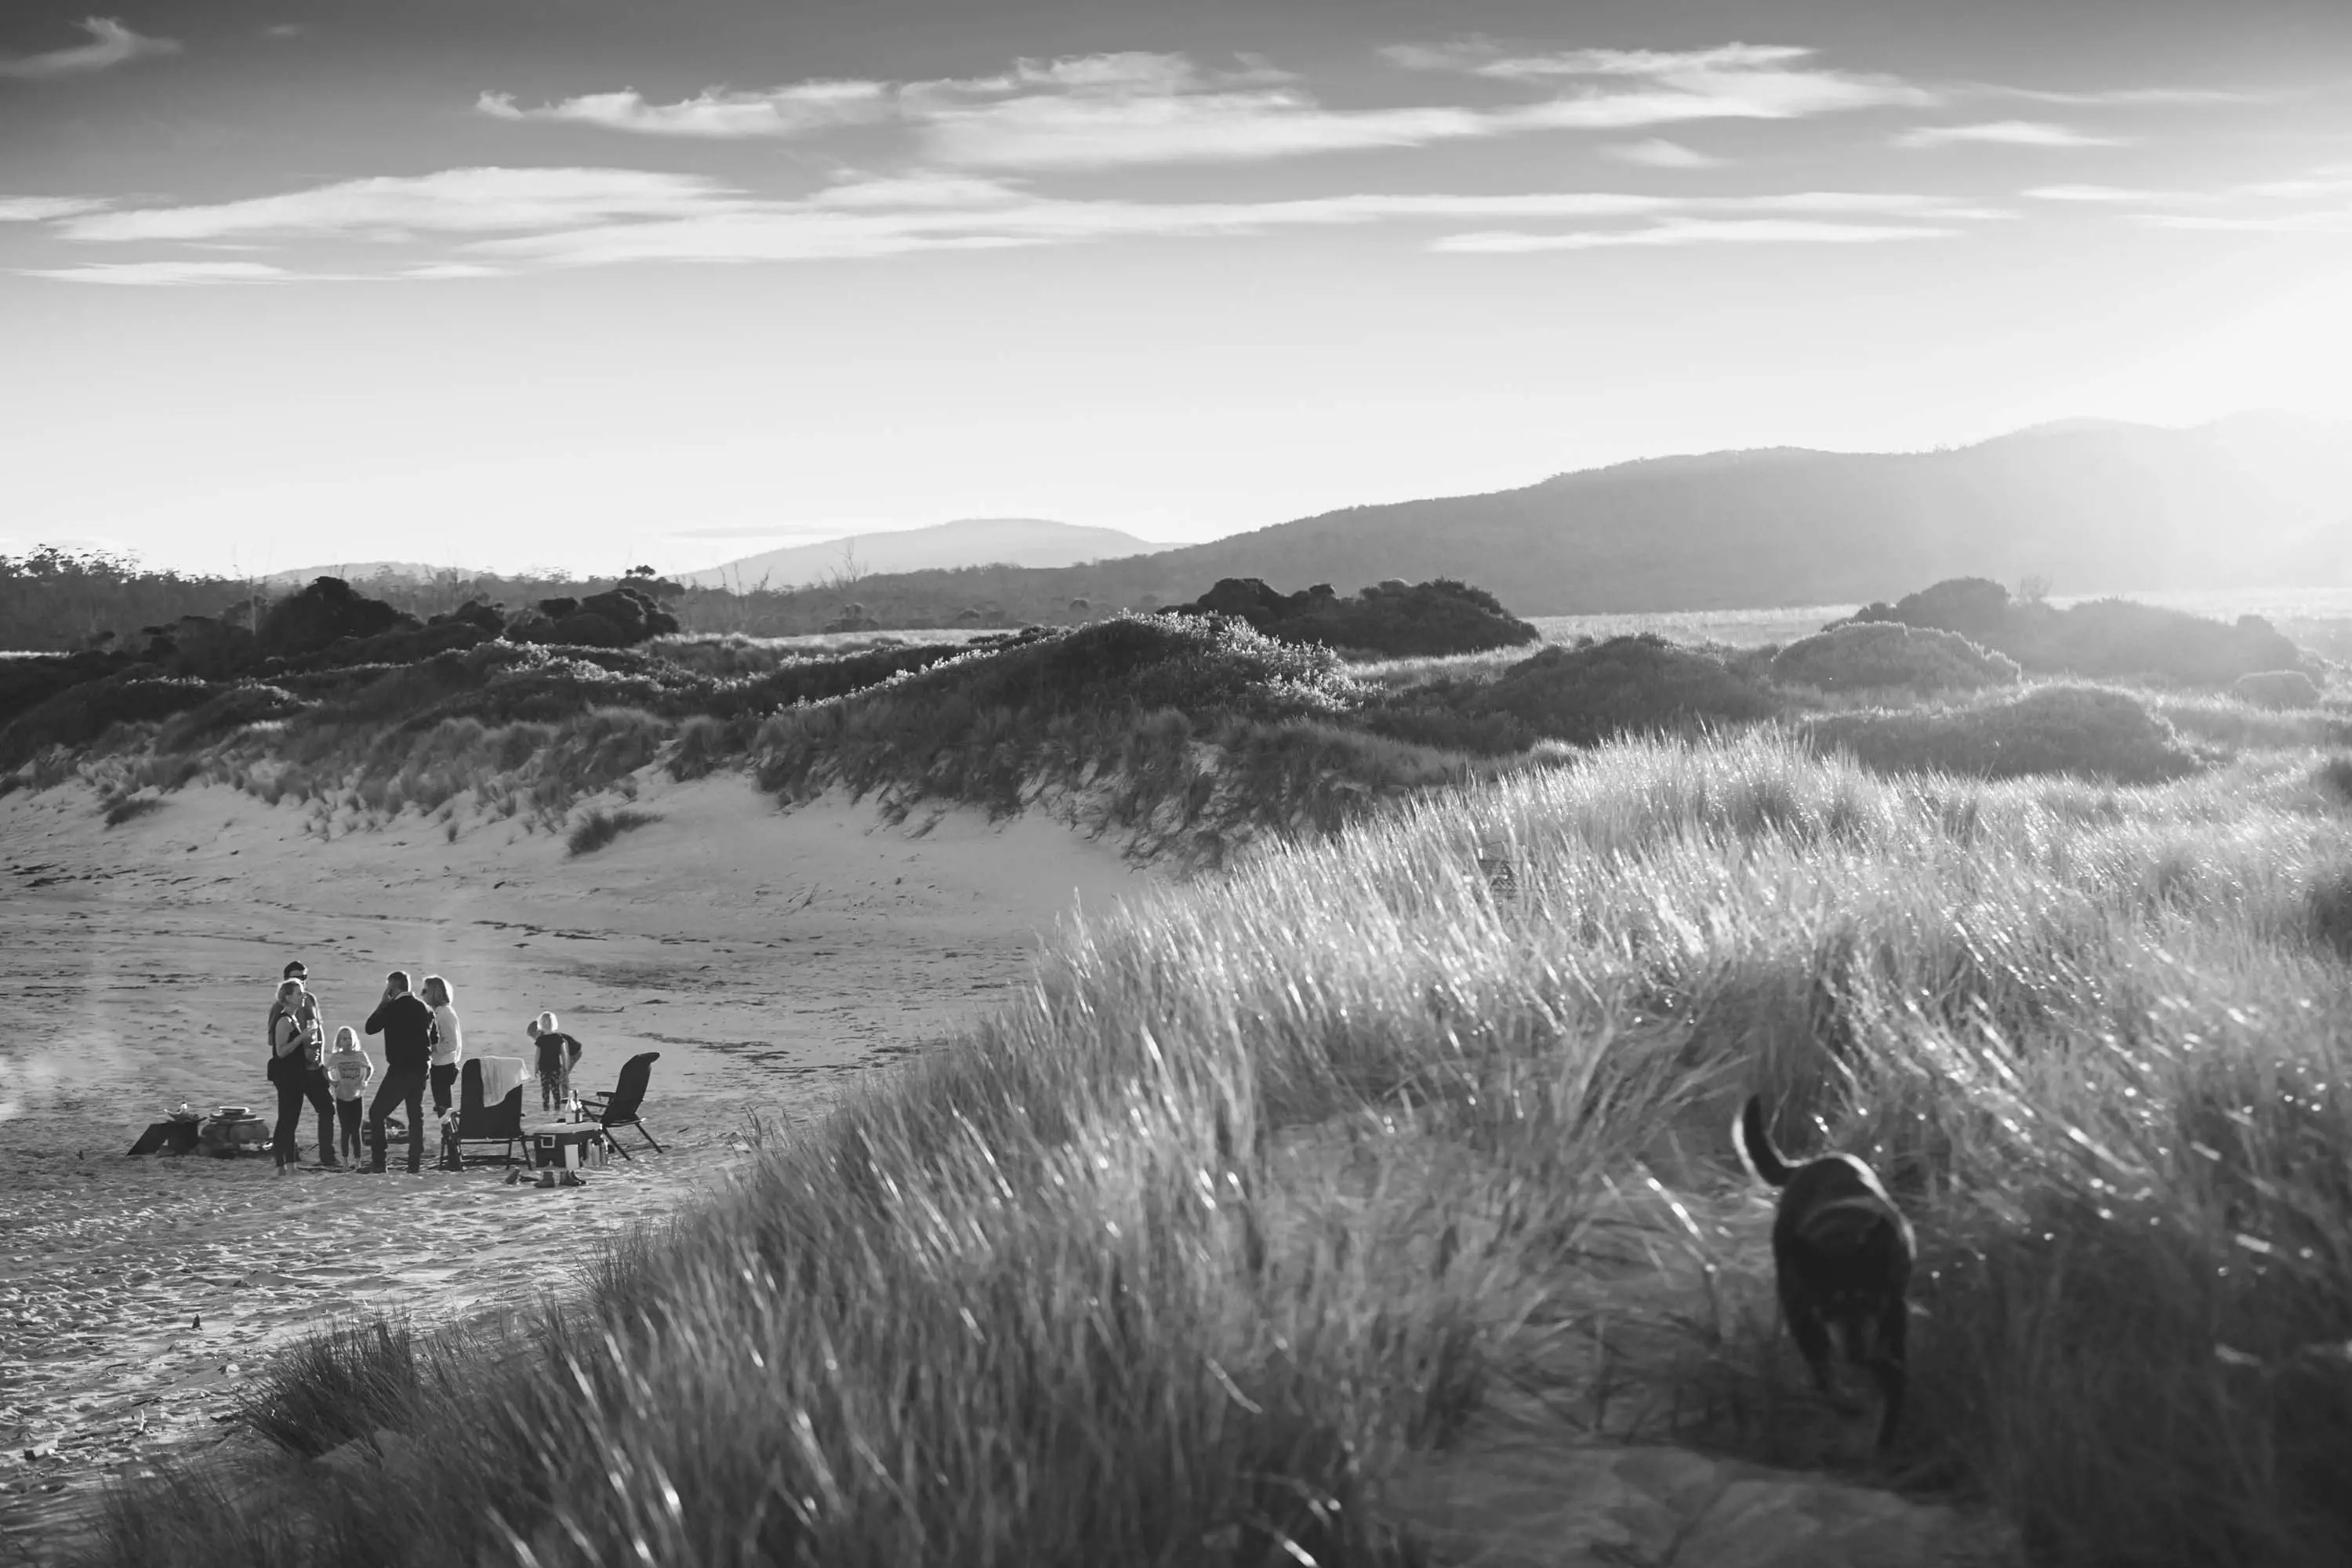 A group of people enjoy a bbq on a beach below grassy hills on a sunny, clear day.